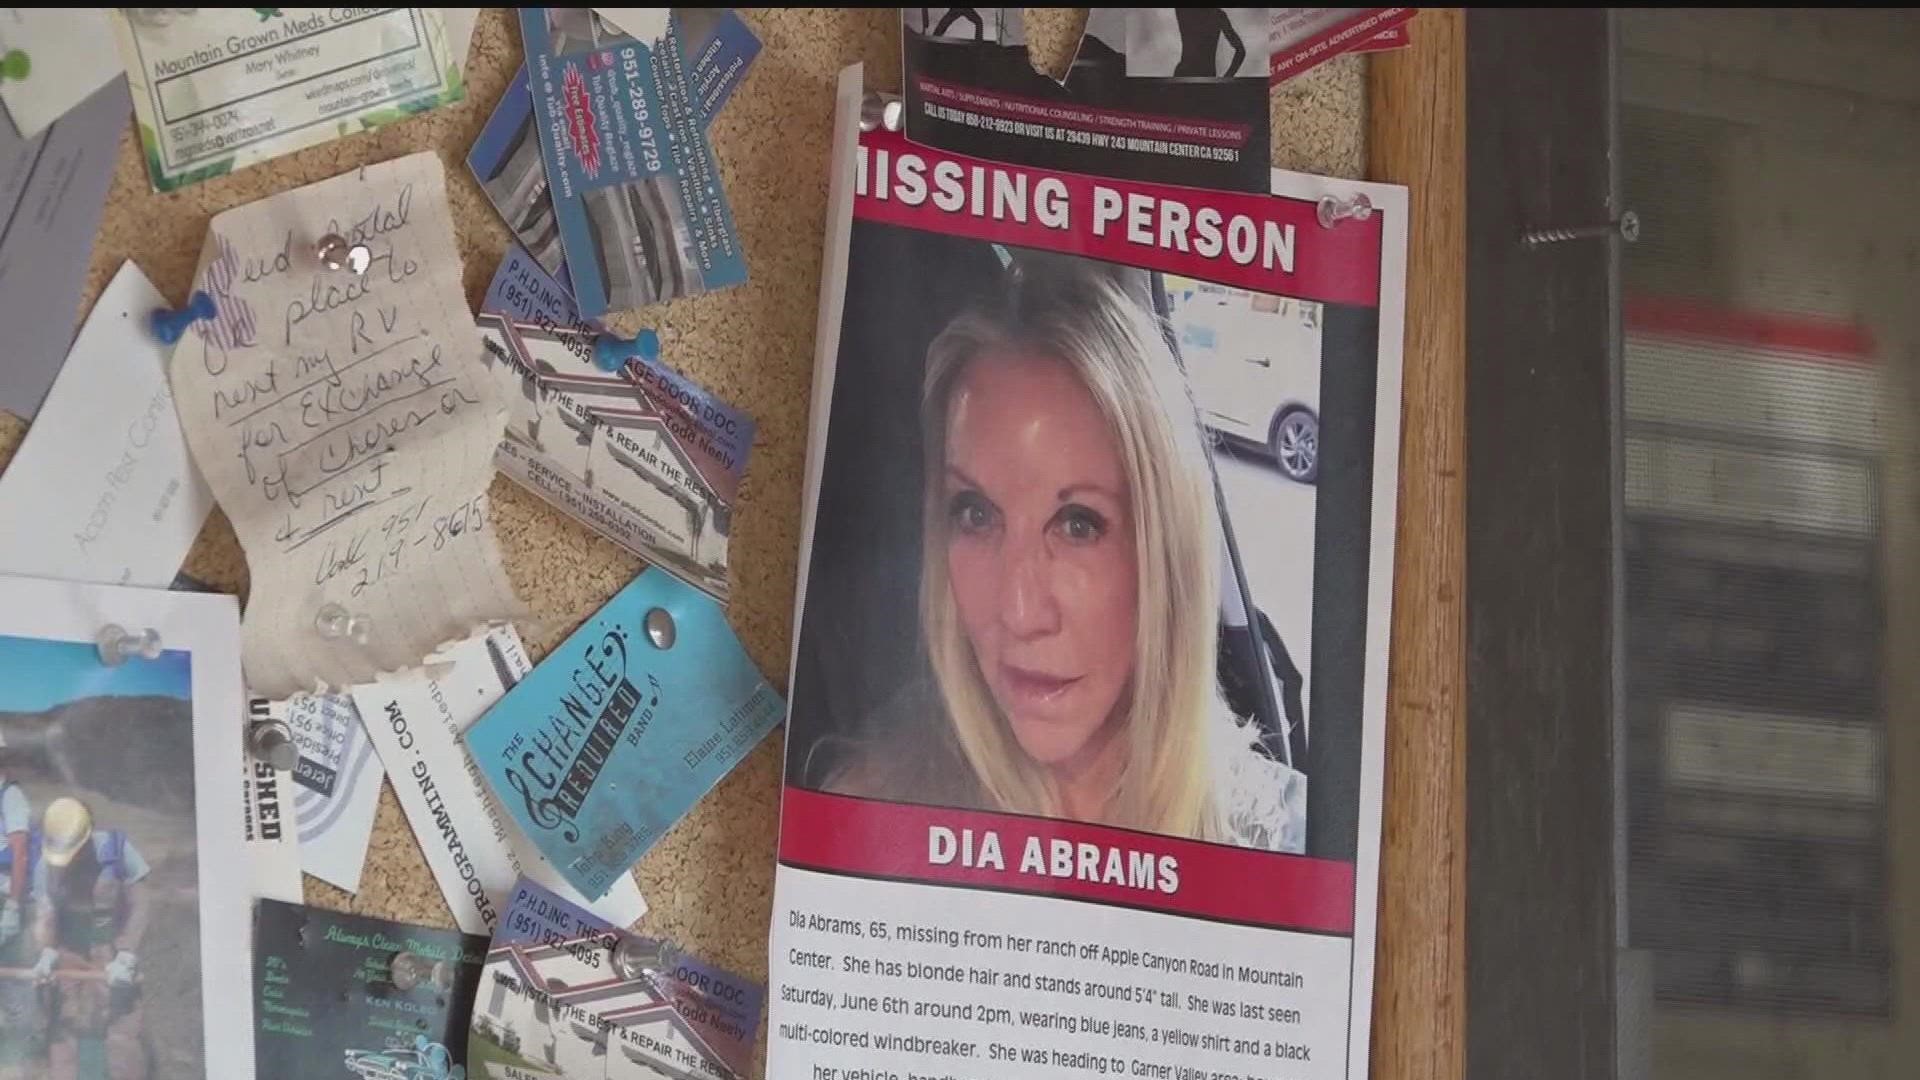 Dia Abrams went missing from ranch near Idyllwild, sale of estate would find $300K reward.